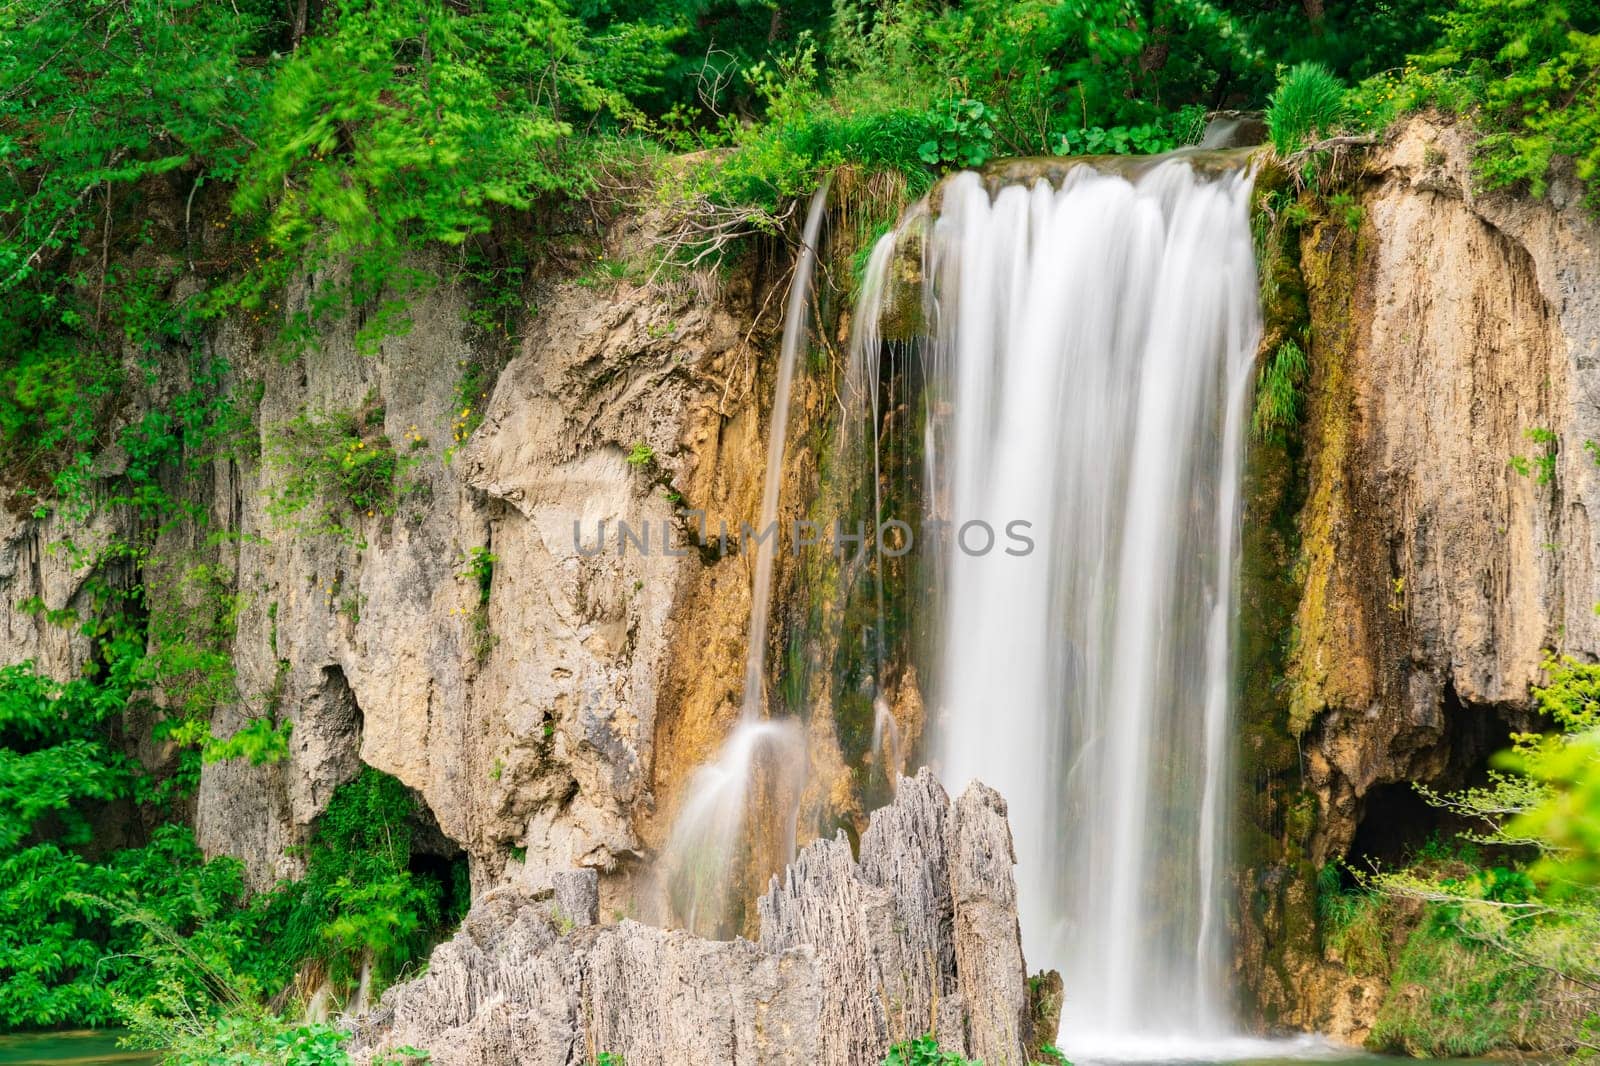 Krka National Park's Exquisite Waterfalls - Serene Beauty of Croatia Unveiled by PhotoTime